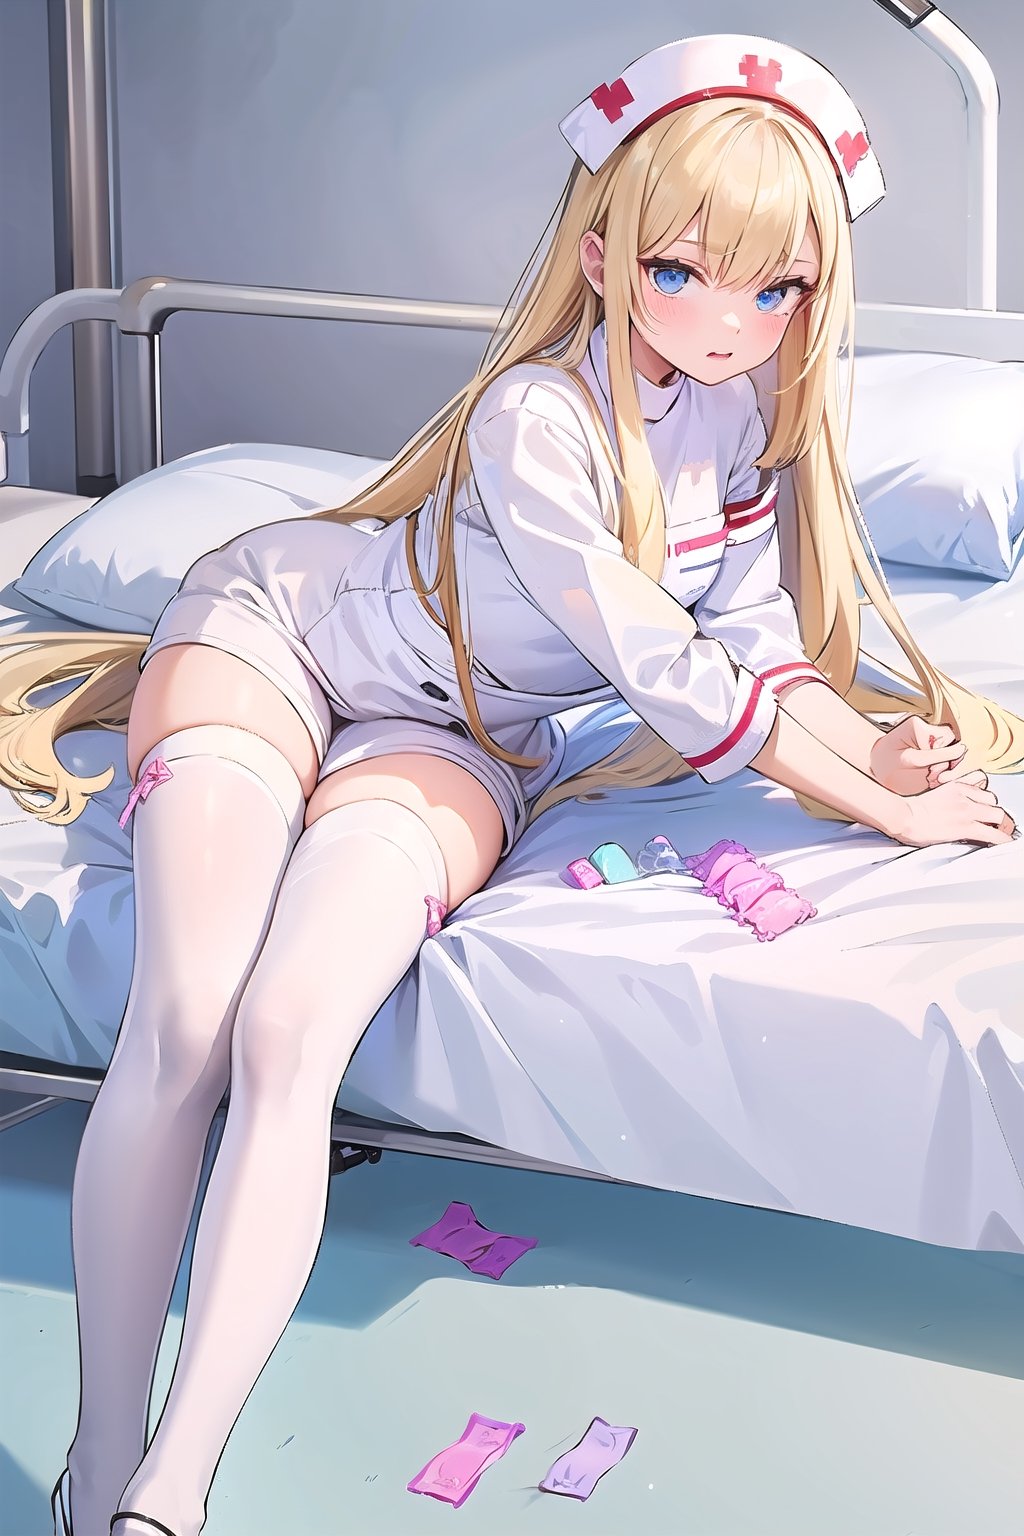 (masterpiece:1.4), (best quality:1.4), illustration, finely detailed, best detailed, clear picture, intricate details, portrait of a full body, expressionless, blush, detailed background, 1girl, blonde_hair, ((golden hair)), (long_hair), sky blue eyes, looking_at_viewer, natural light, (((Criin Style))), legs, ((white thighhighs, white high heels)), sitting, zettai_ryouiki, mini_skirt, (((hospital, ward, nurse, nurse_outfit, nurse_uniform, pure white nurse, pure white nurse outfit, pure white nurse uniform, white nurse outfit, white nurse uniform, cum on thigh, condoms on bed))), side_view, sideview, cum, semen, after fellatio